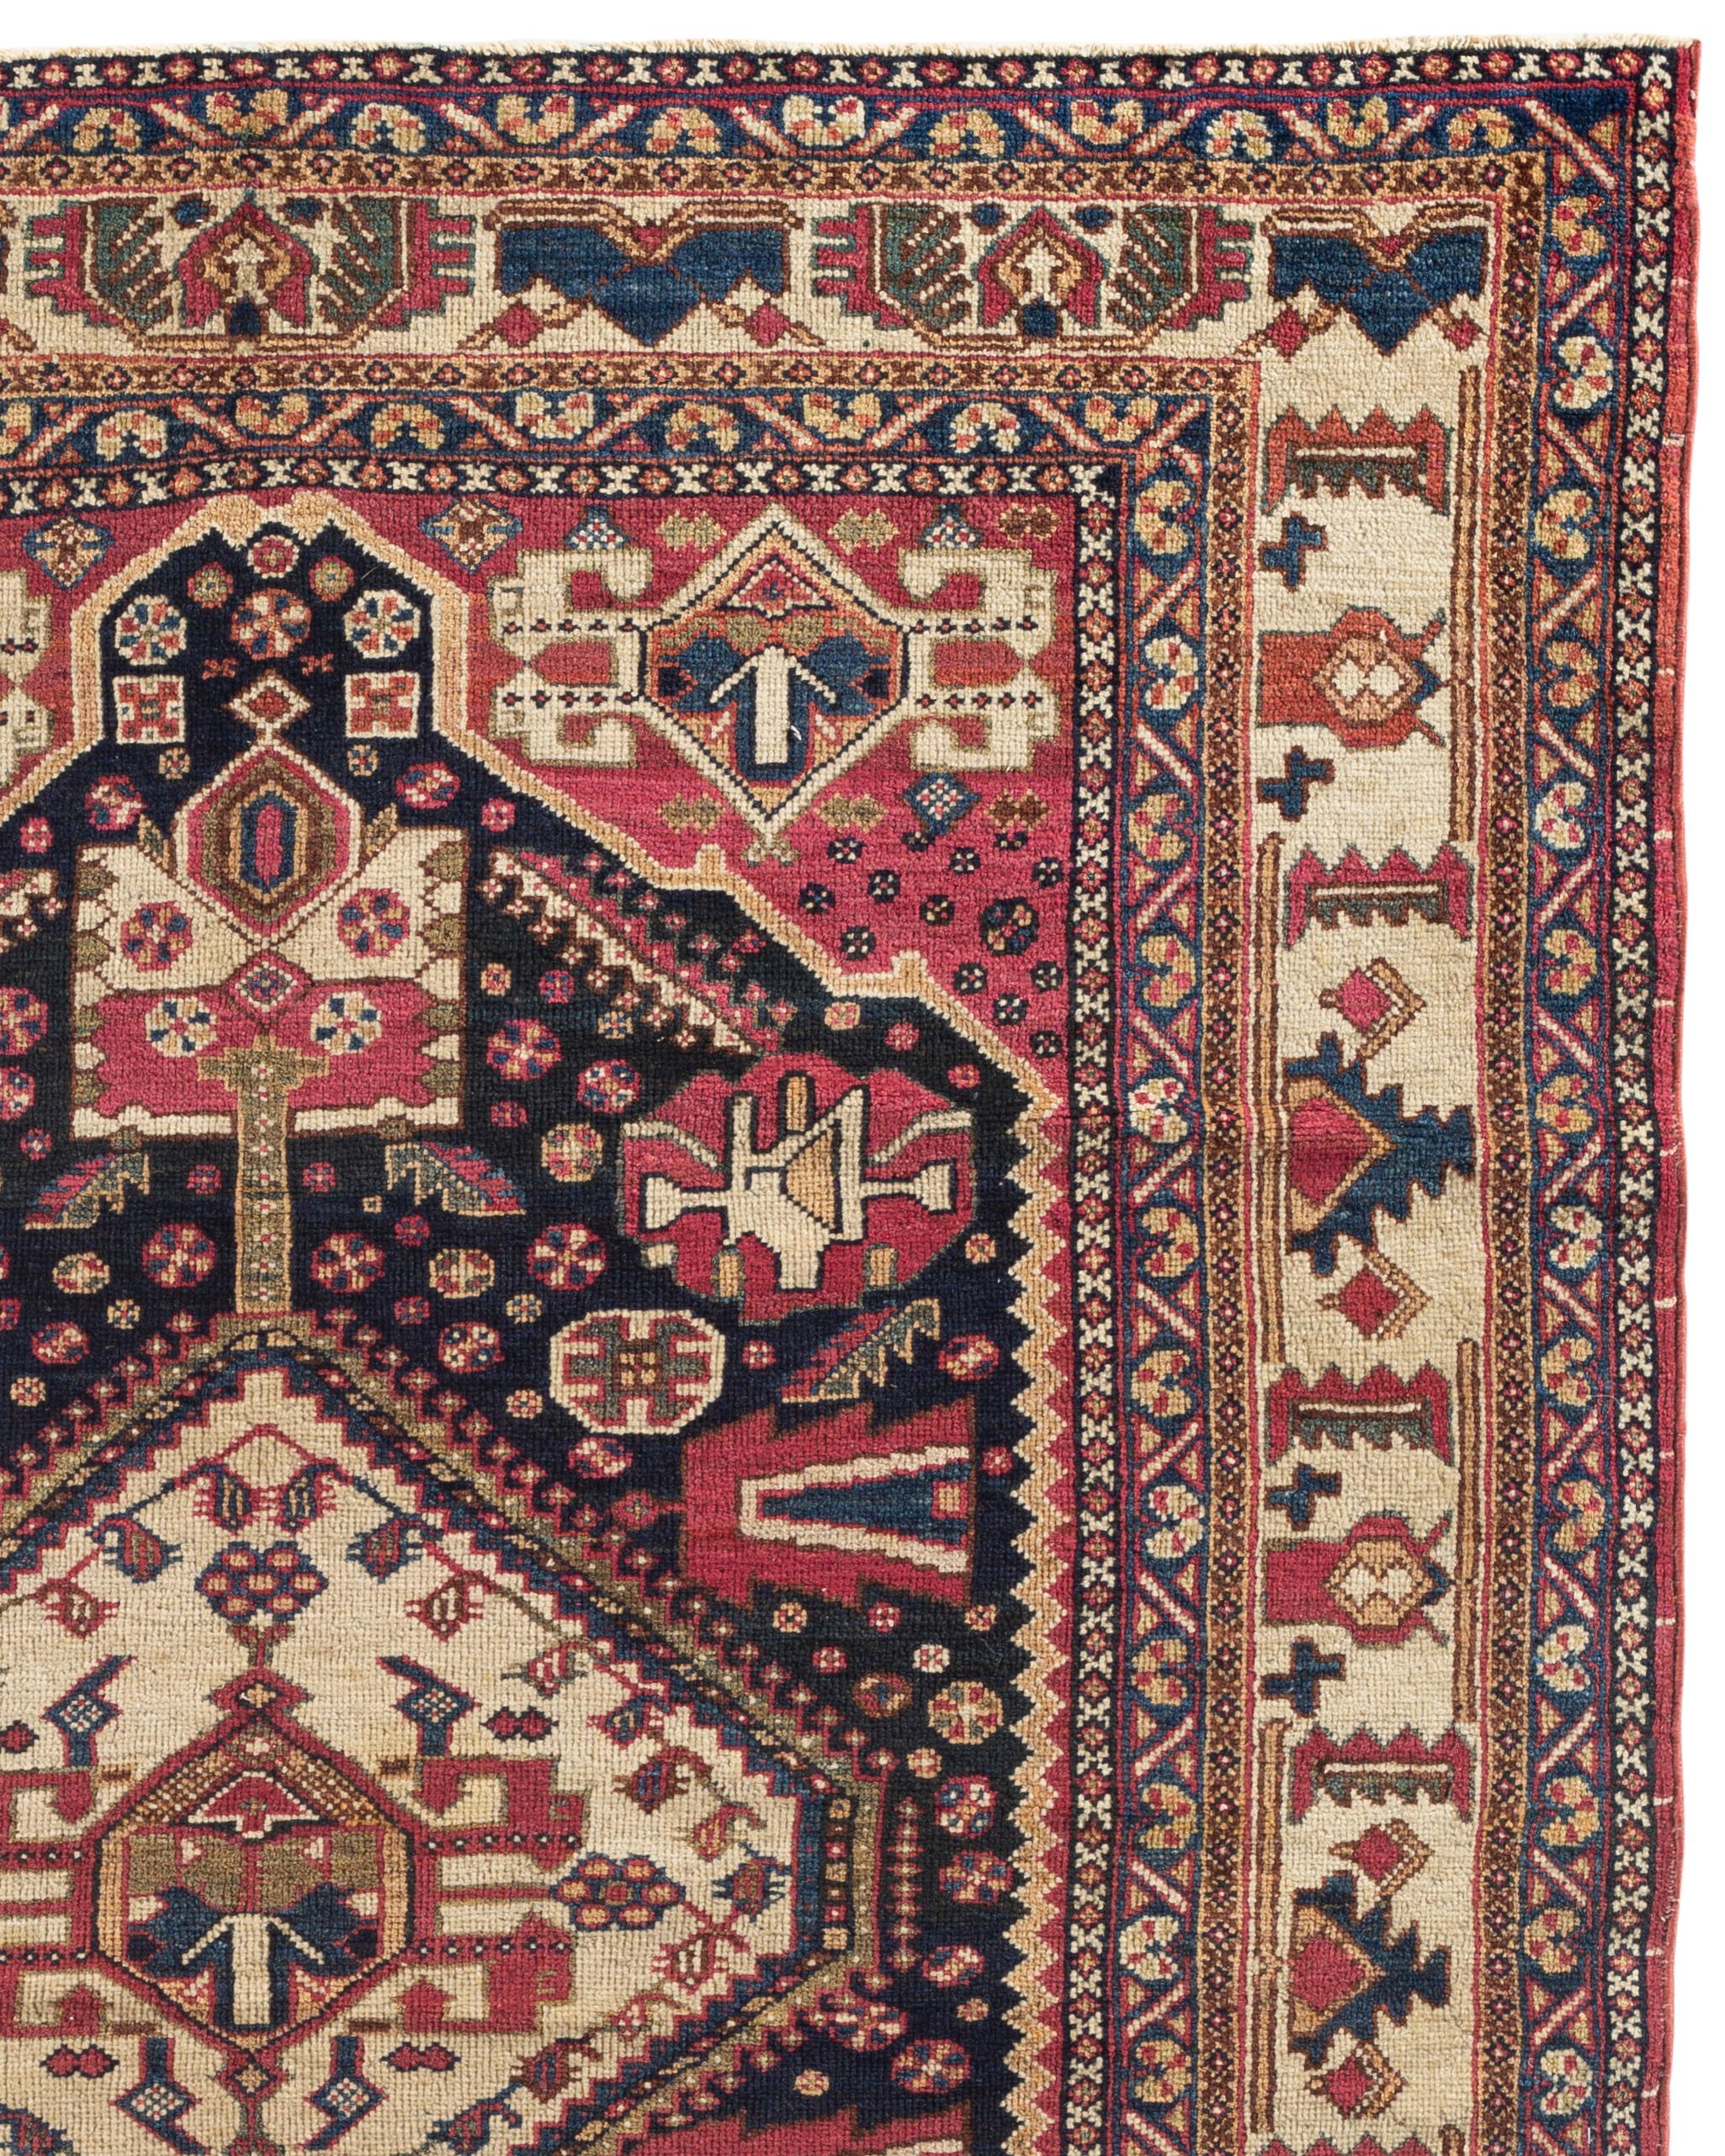 Antique Qashgai rug, circa 1880. The Qashqai are a tribal confederation in Iran. They come from different ethnic backgrounds including Turkoman, Lurs and Kurds. Their rugs often have geometric patterns and floral designs. Most Qashgai rugs are small